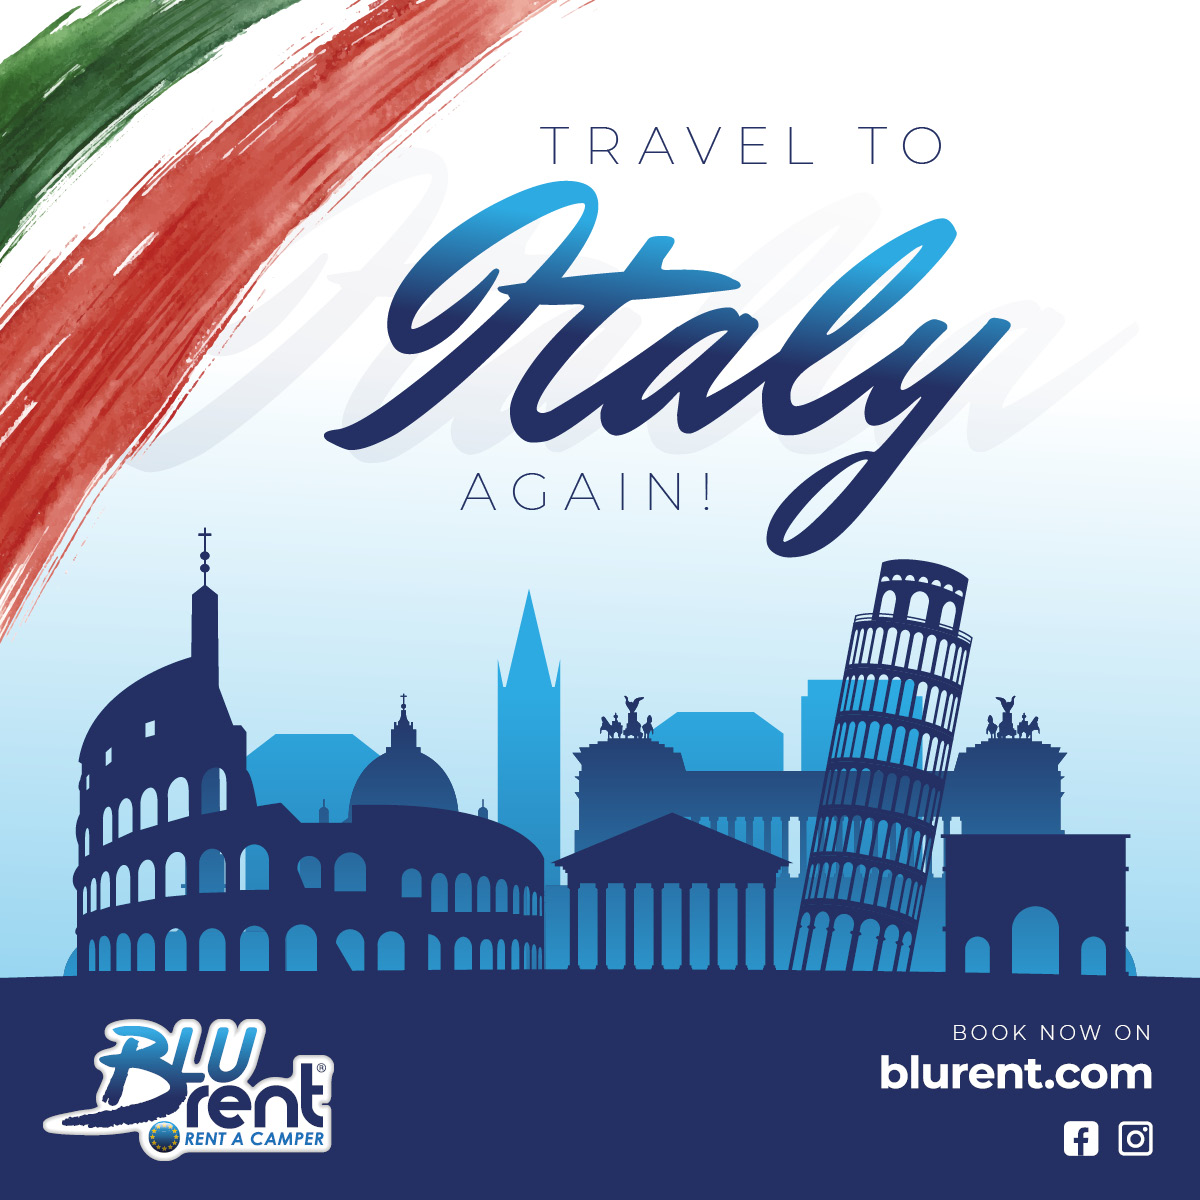 Travel to Italy again!